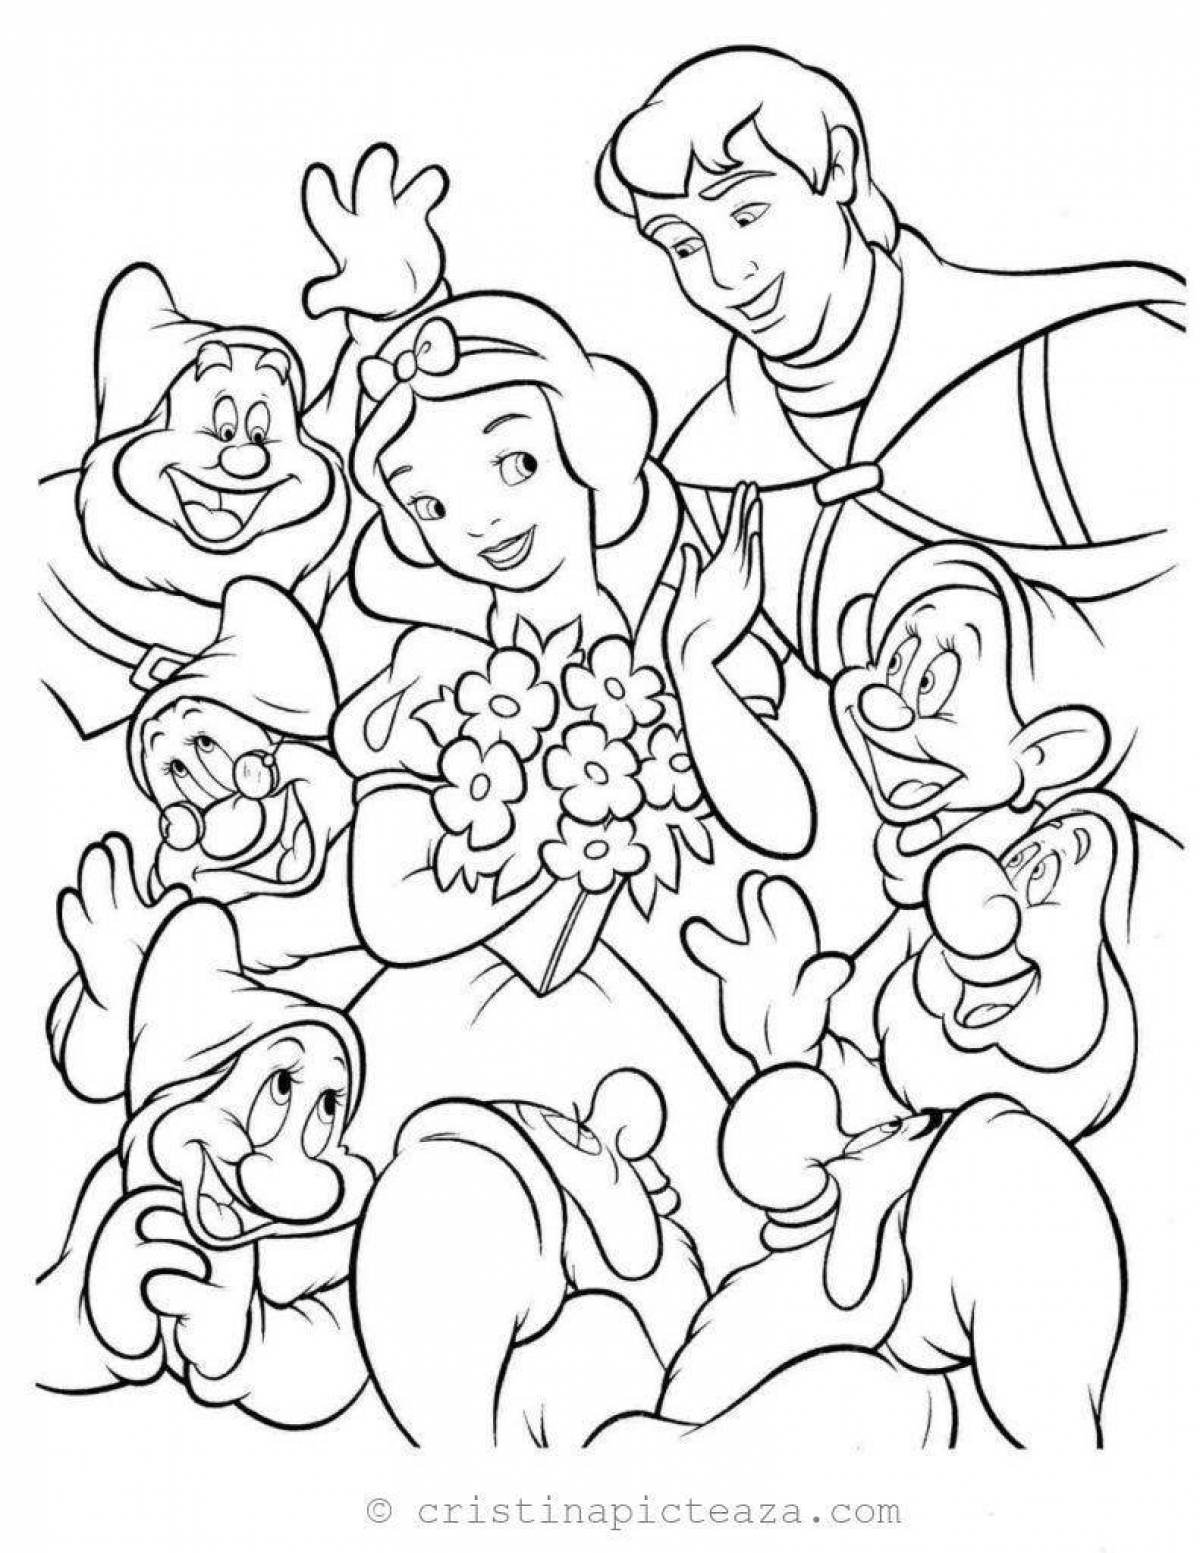 Coloring page wild snow white and 7 dwarfs